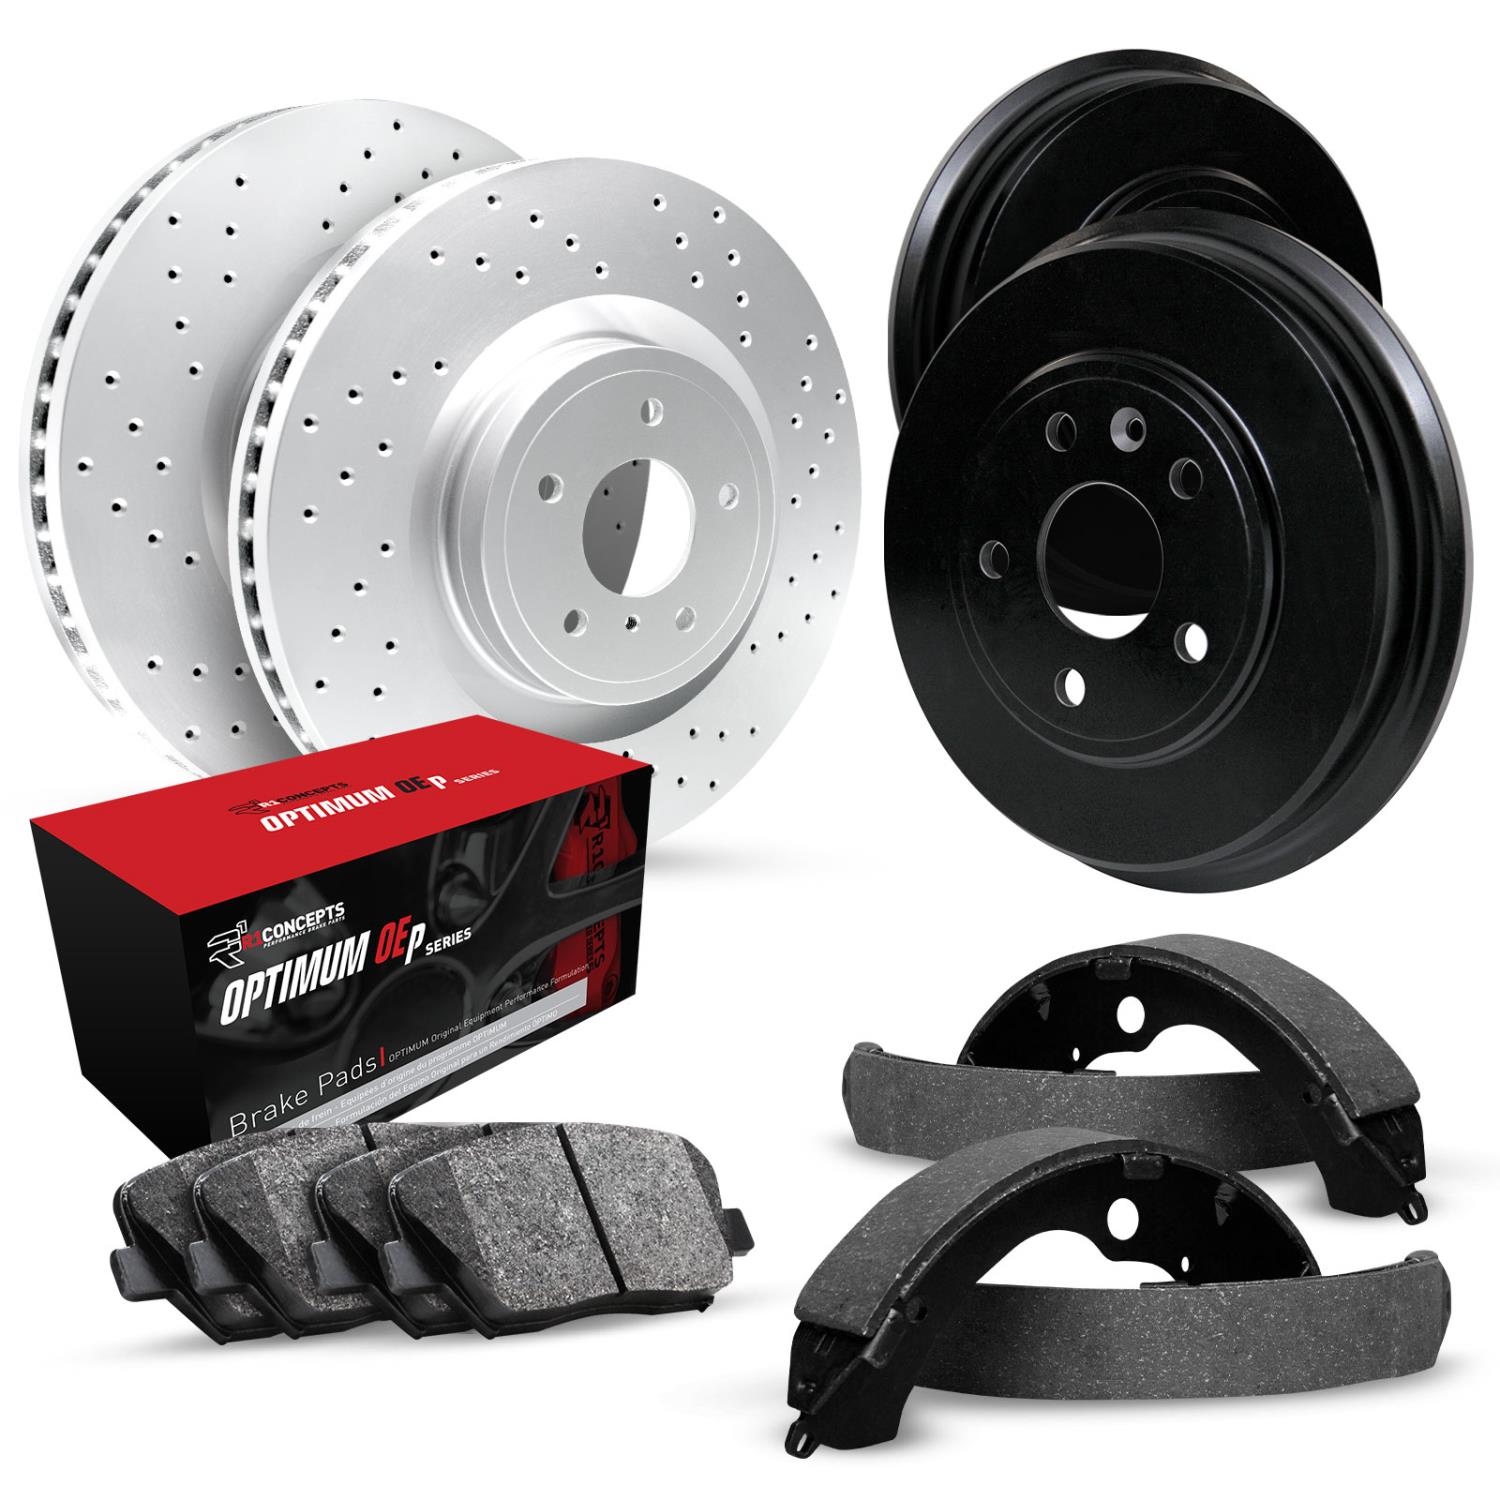 GEO-Carbon Drilled Brake Rotor & Drum Set w/Optimum OE Pads & Shoes, 1999-1999 Infiniti/Nissan, Position: Front & Rear